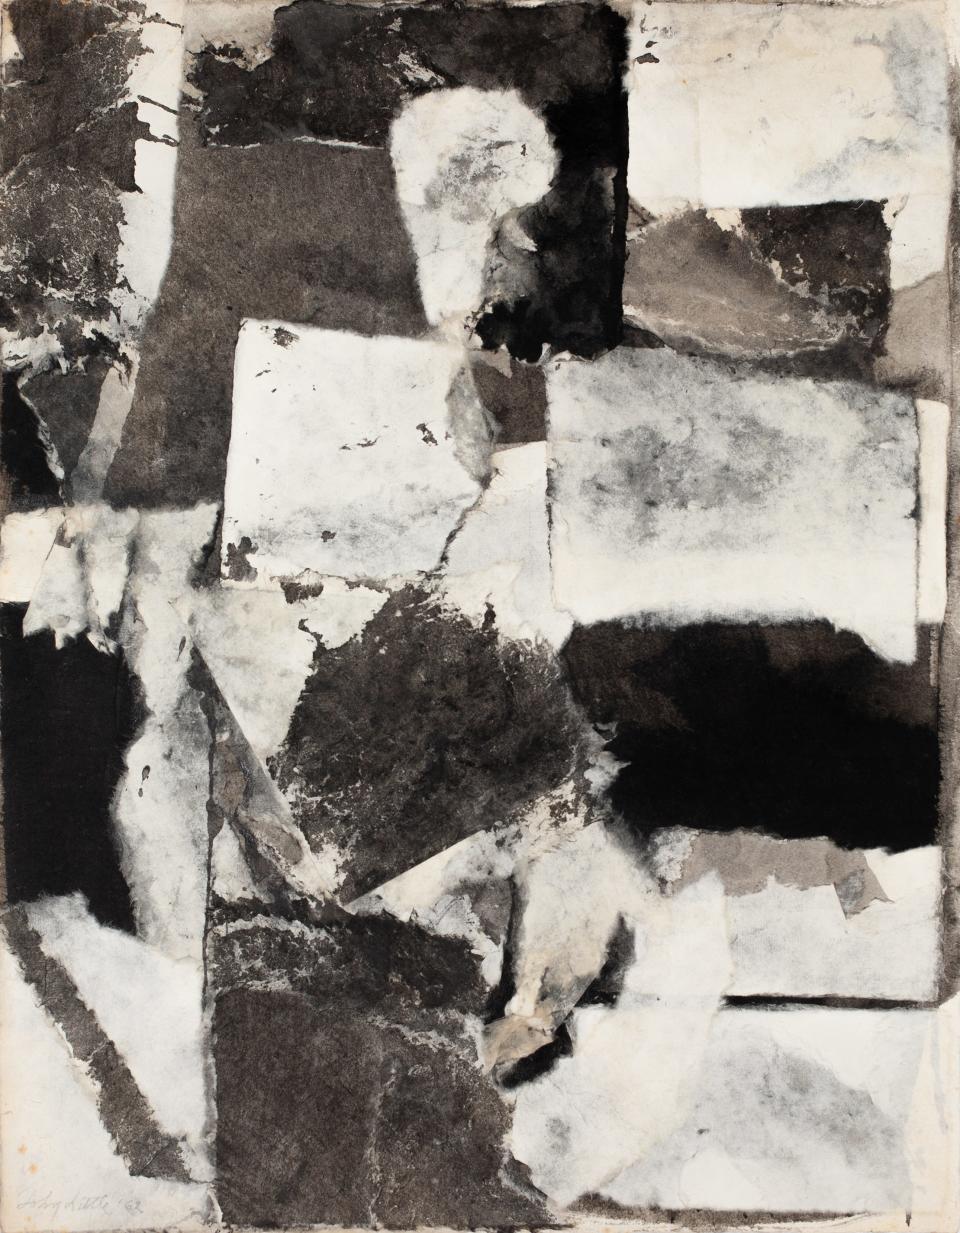 "Untitled" by John Little, ink and collage with Douglas Howell paper, 1962